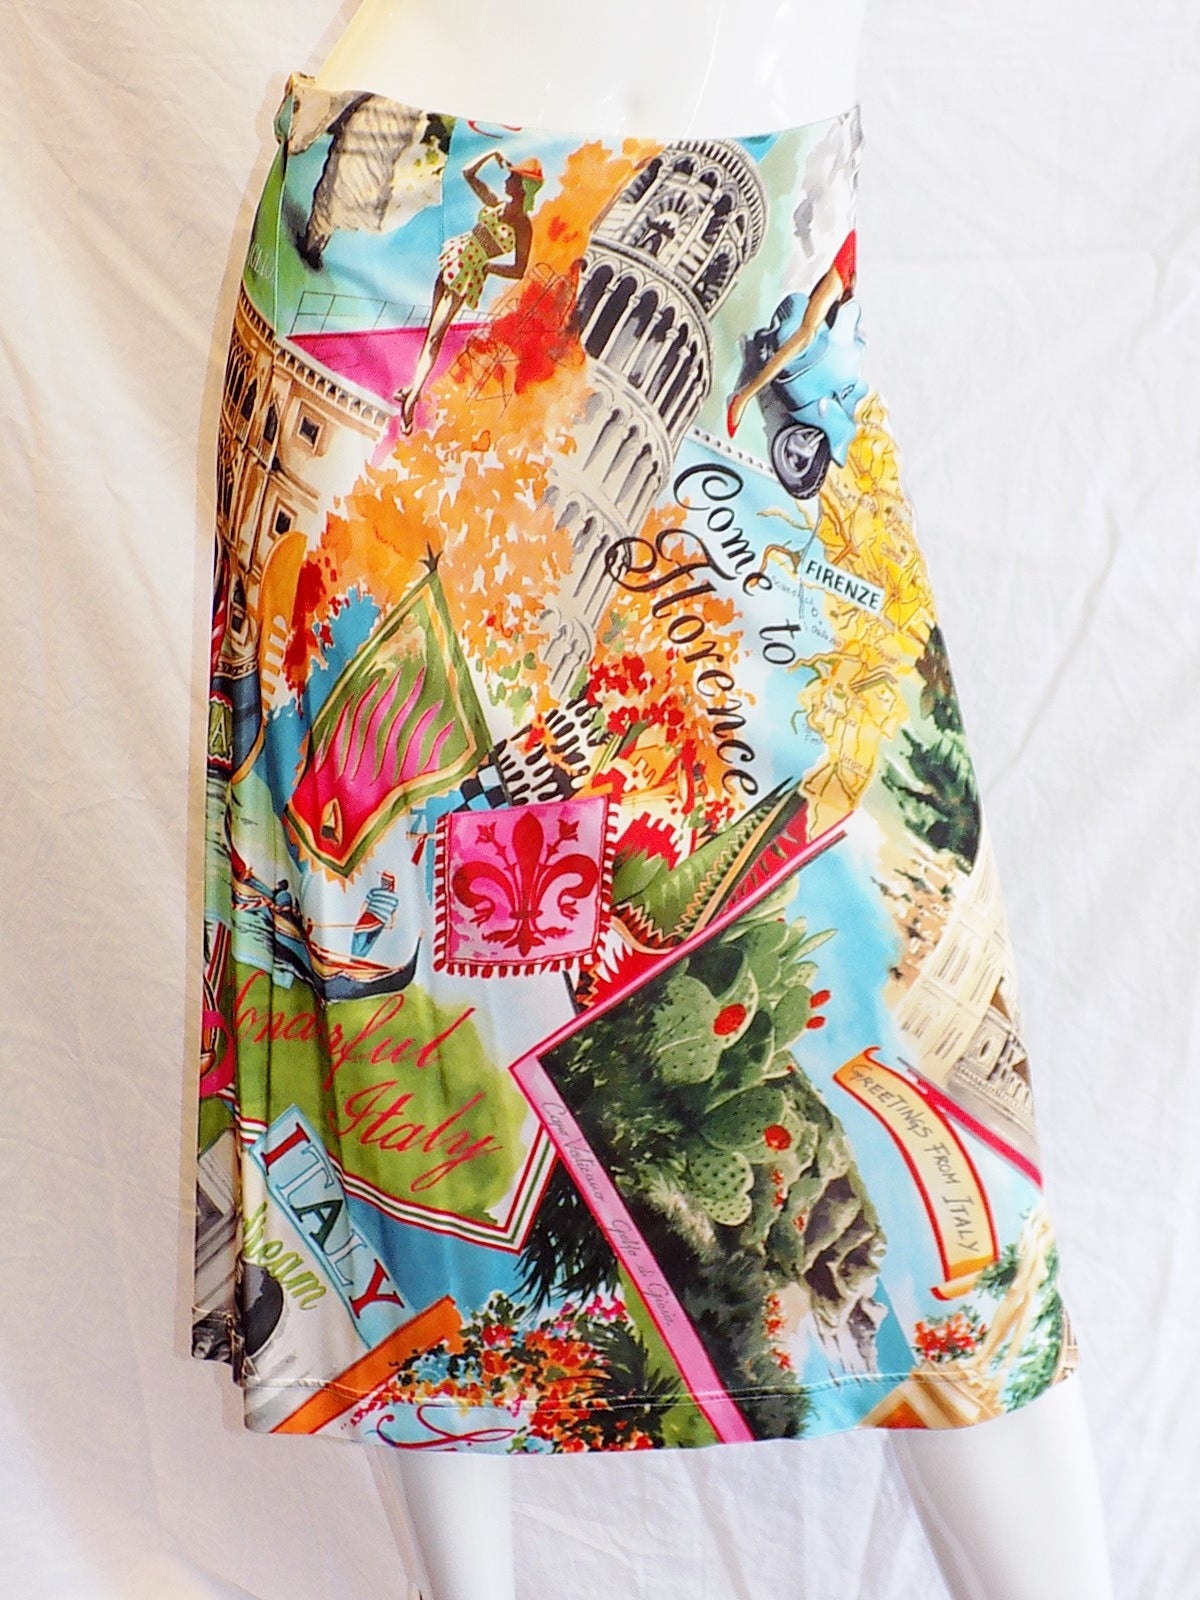 Playful and super cute  Dolce and Gabanna top and skirt for spring/ summer.  features Italian postcard images /souvenirs. Silky poly jersey. pristine condition. Size 40.
A line skirt with zippered waistline. 
Waist 28